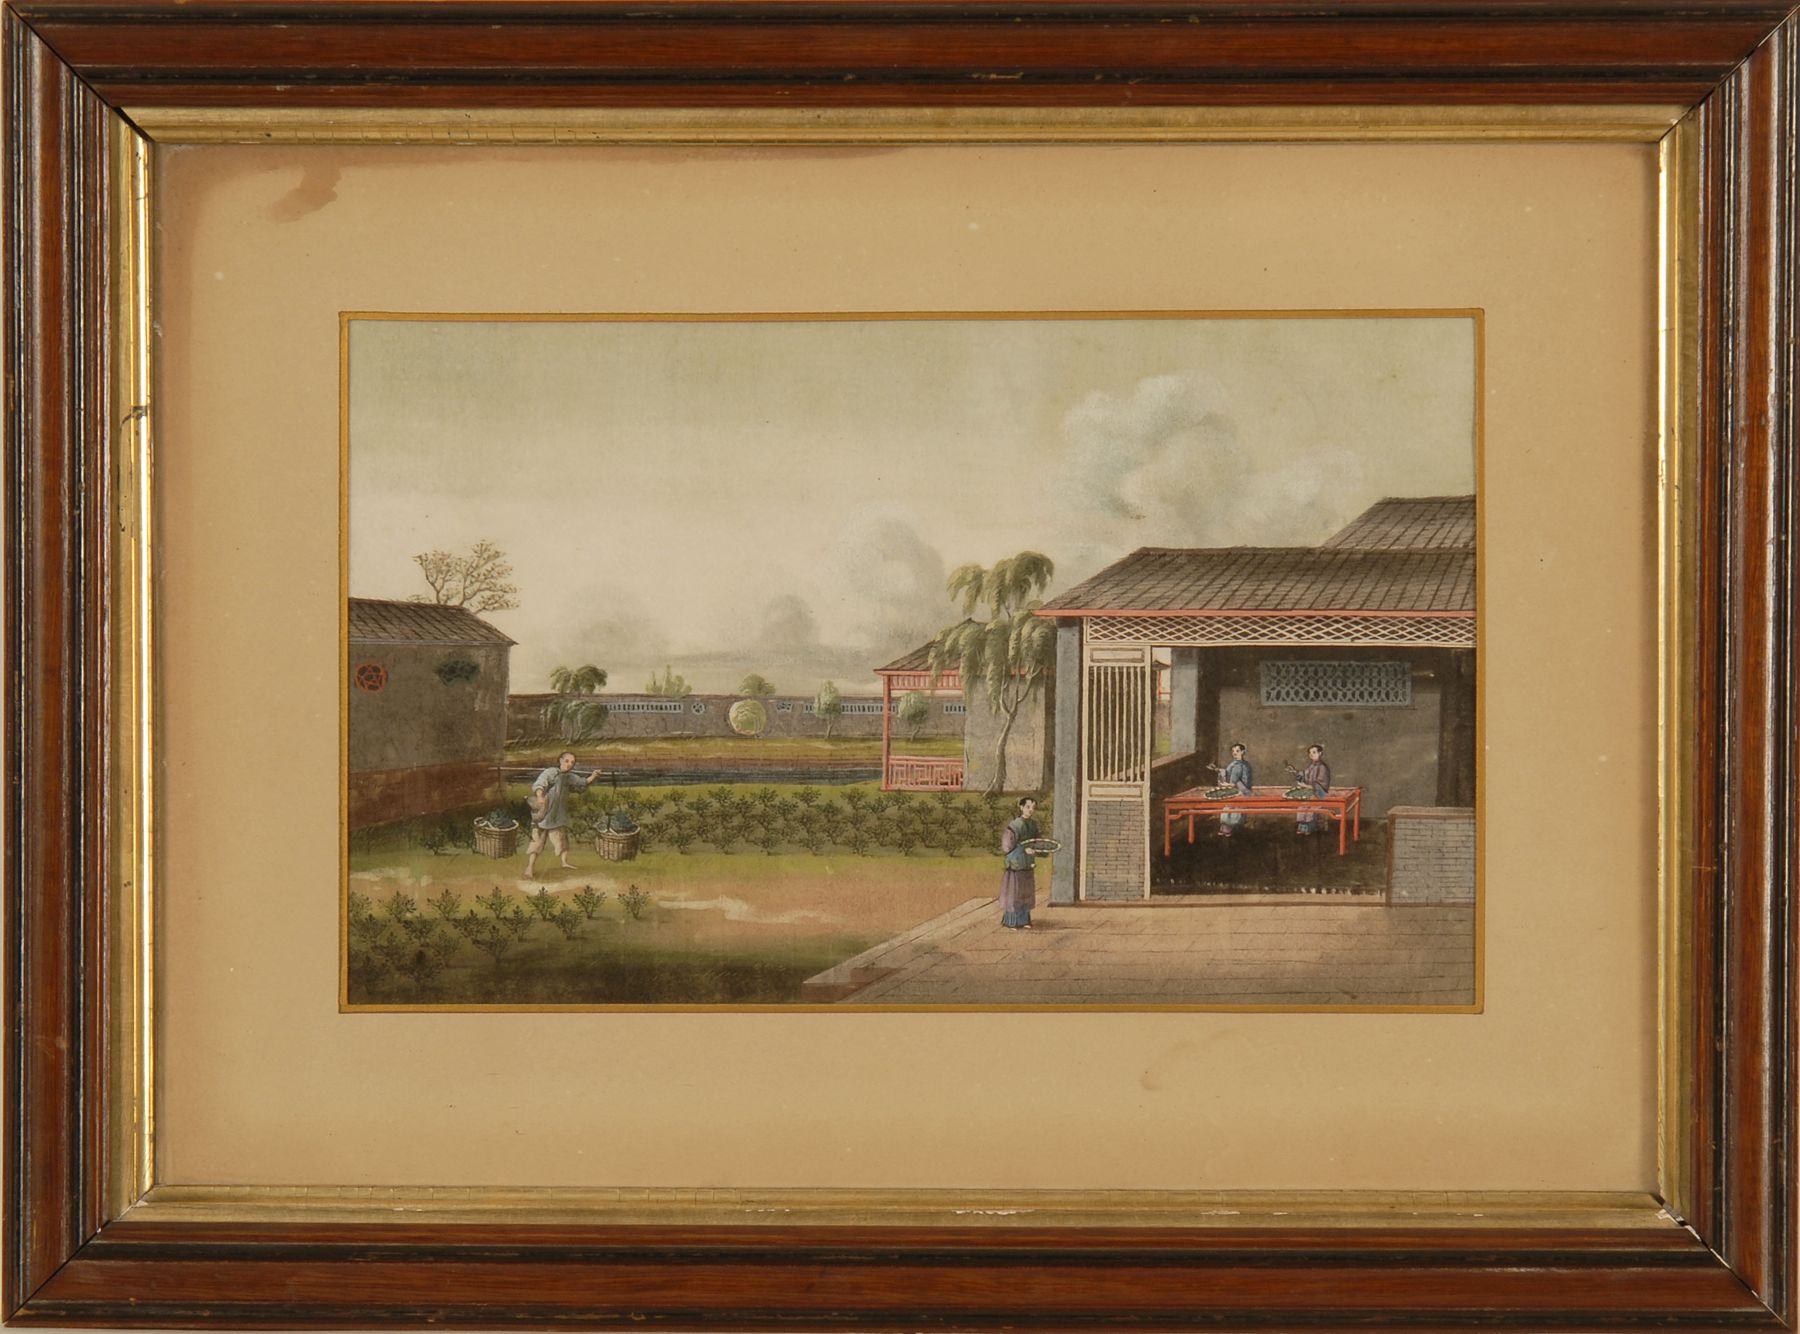 FRAMED CHINESE EXPORT PAINTING 14b4d8